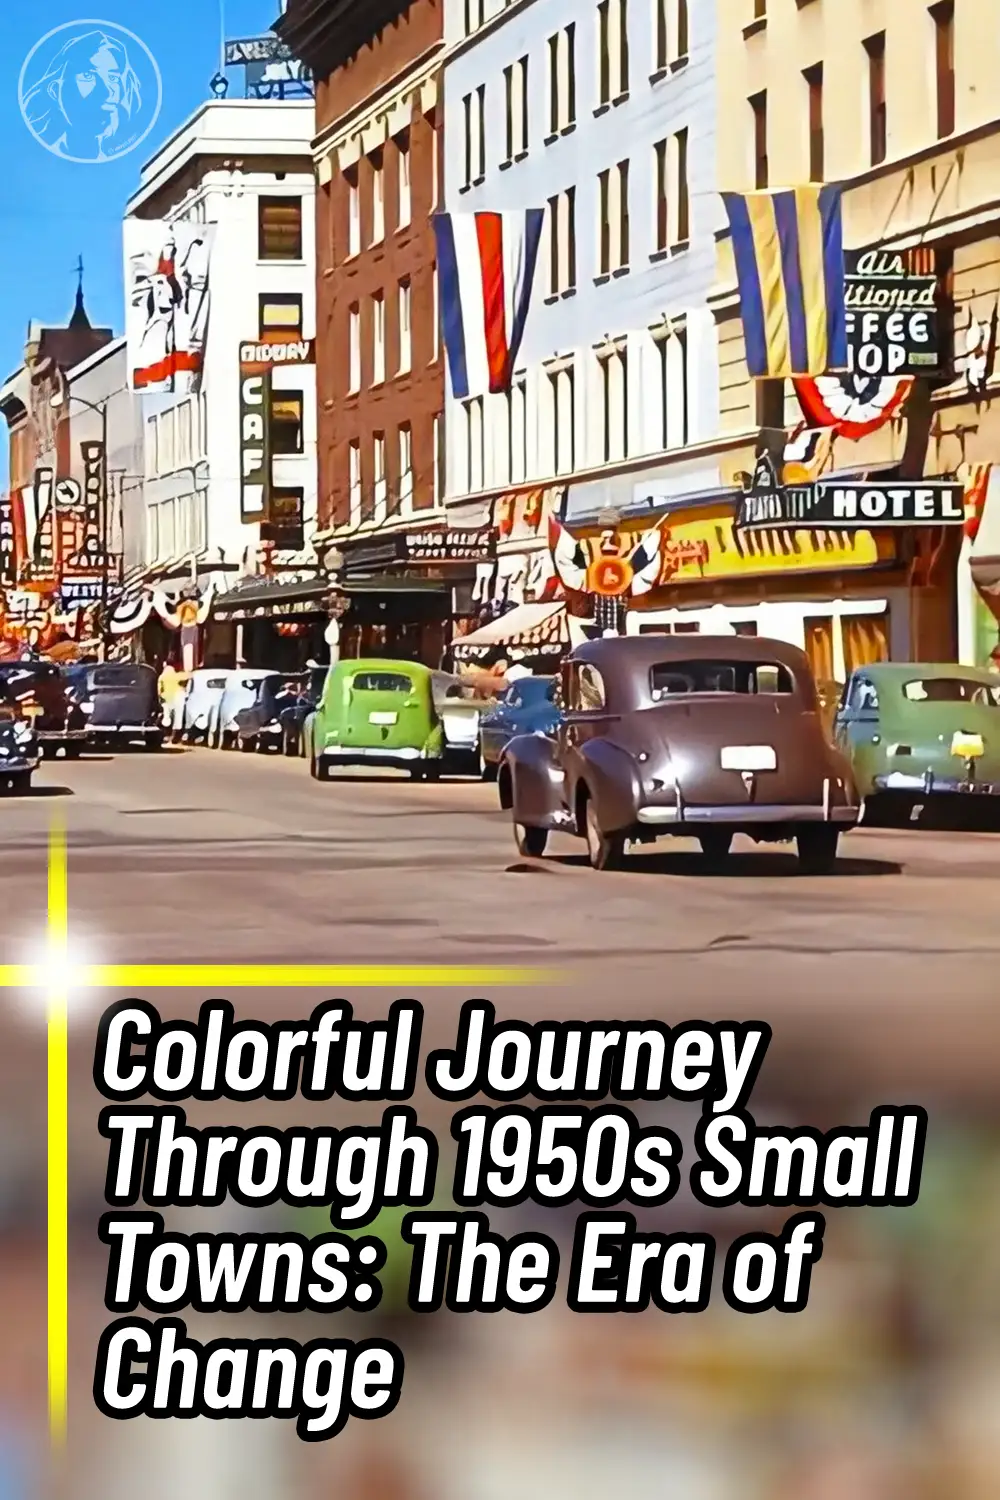 Colorful Journey Through 1950s Small Towns: The Era of Change